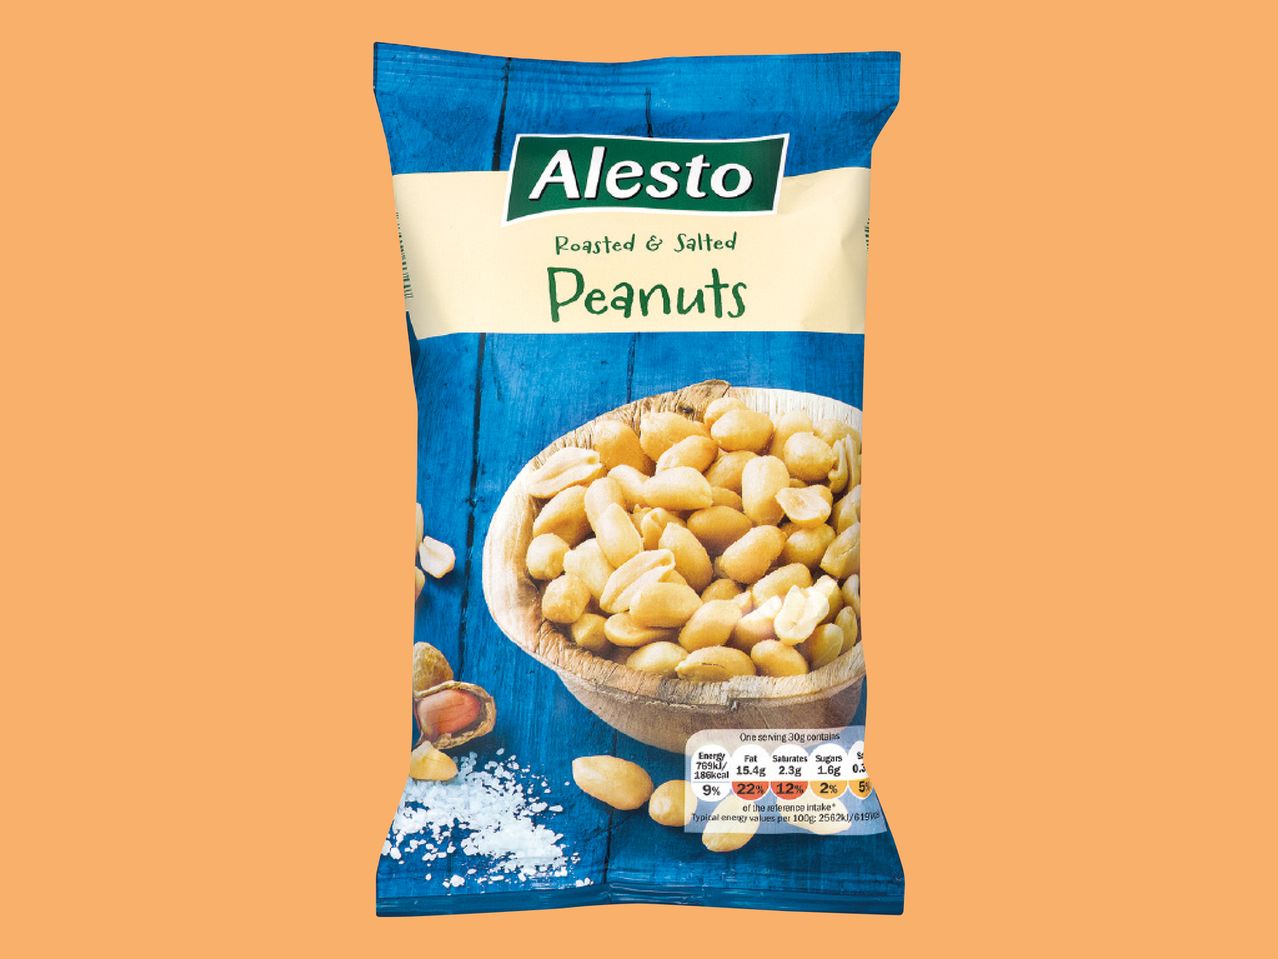 Go to full screen view: Alesto Roasted & Salted Peanuts - Image 1